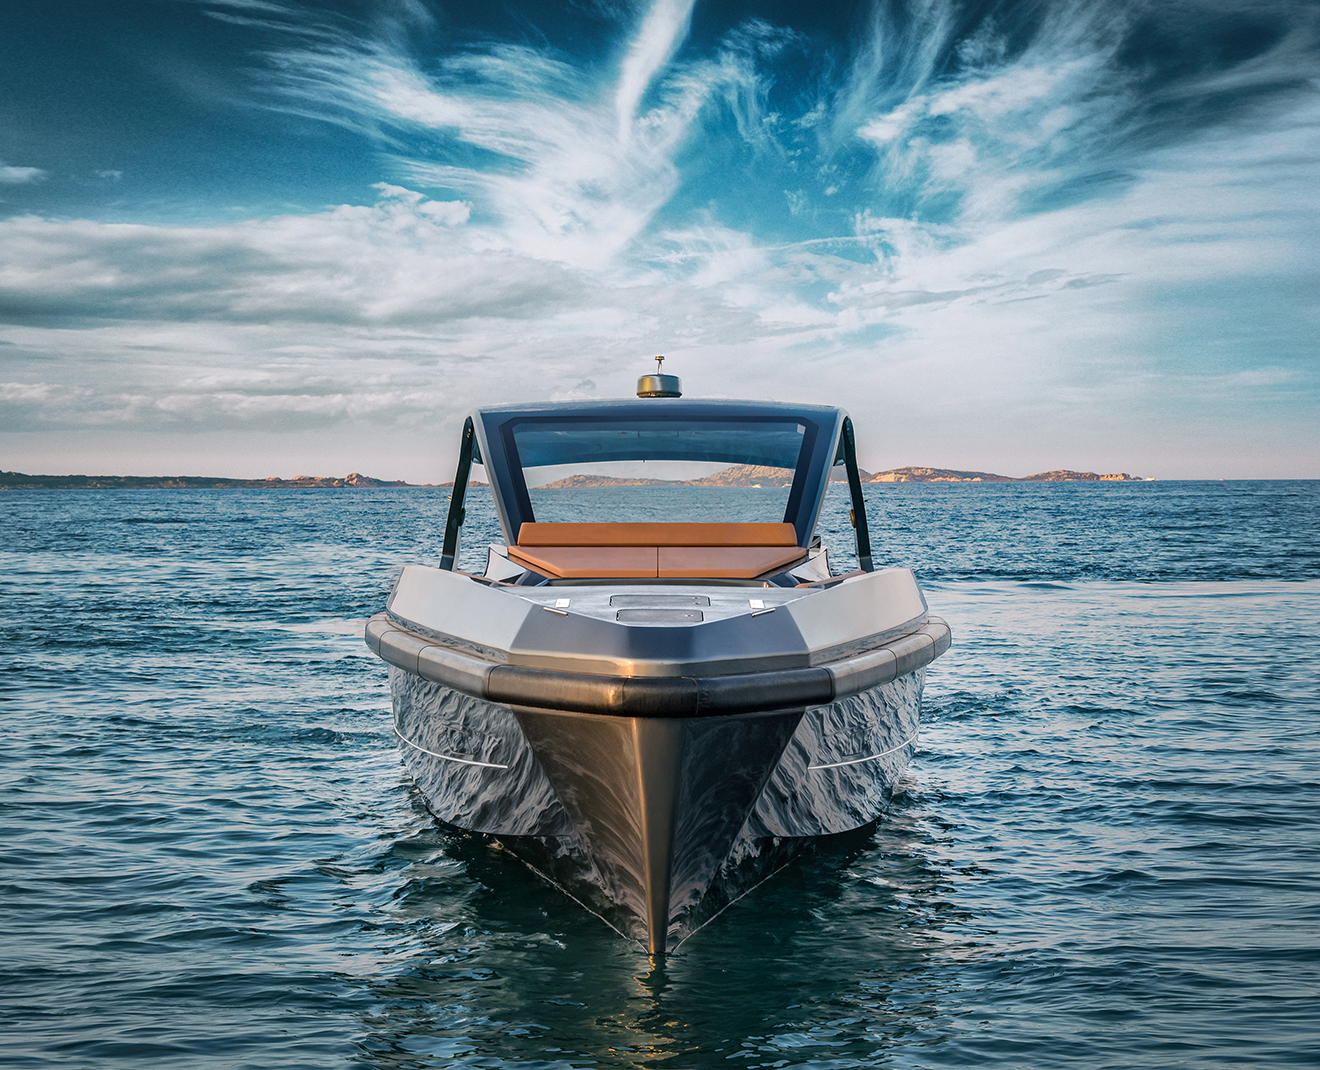 A sleek and aggressively sporting exterior combine with a spacious upper deck, clever design features and a sumptuously appointed interior resulting in a flexible day vessel, equally equipped for a full day out exploring the coastline or a fun party boat. (Apex Yachts)